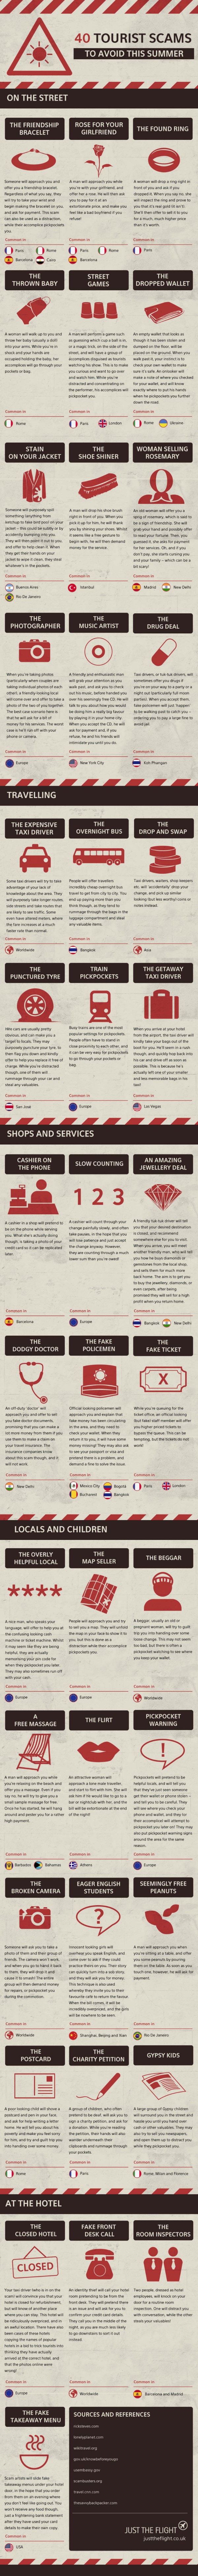 Tourist scams infographic